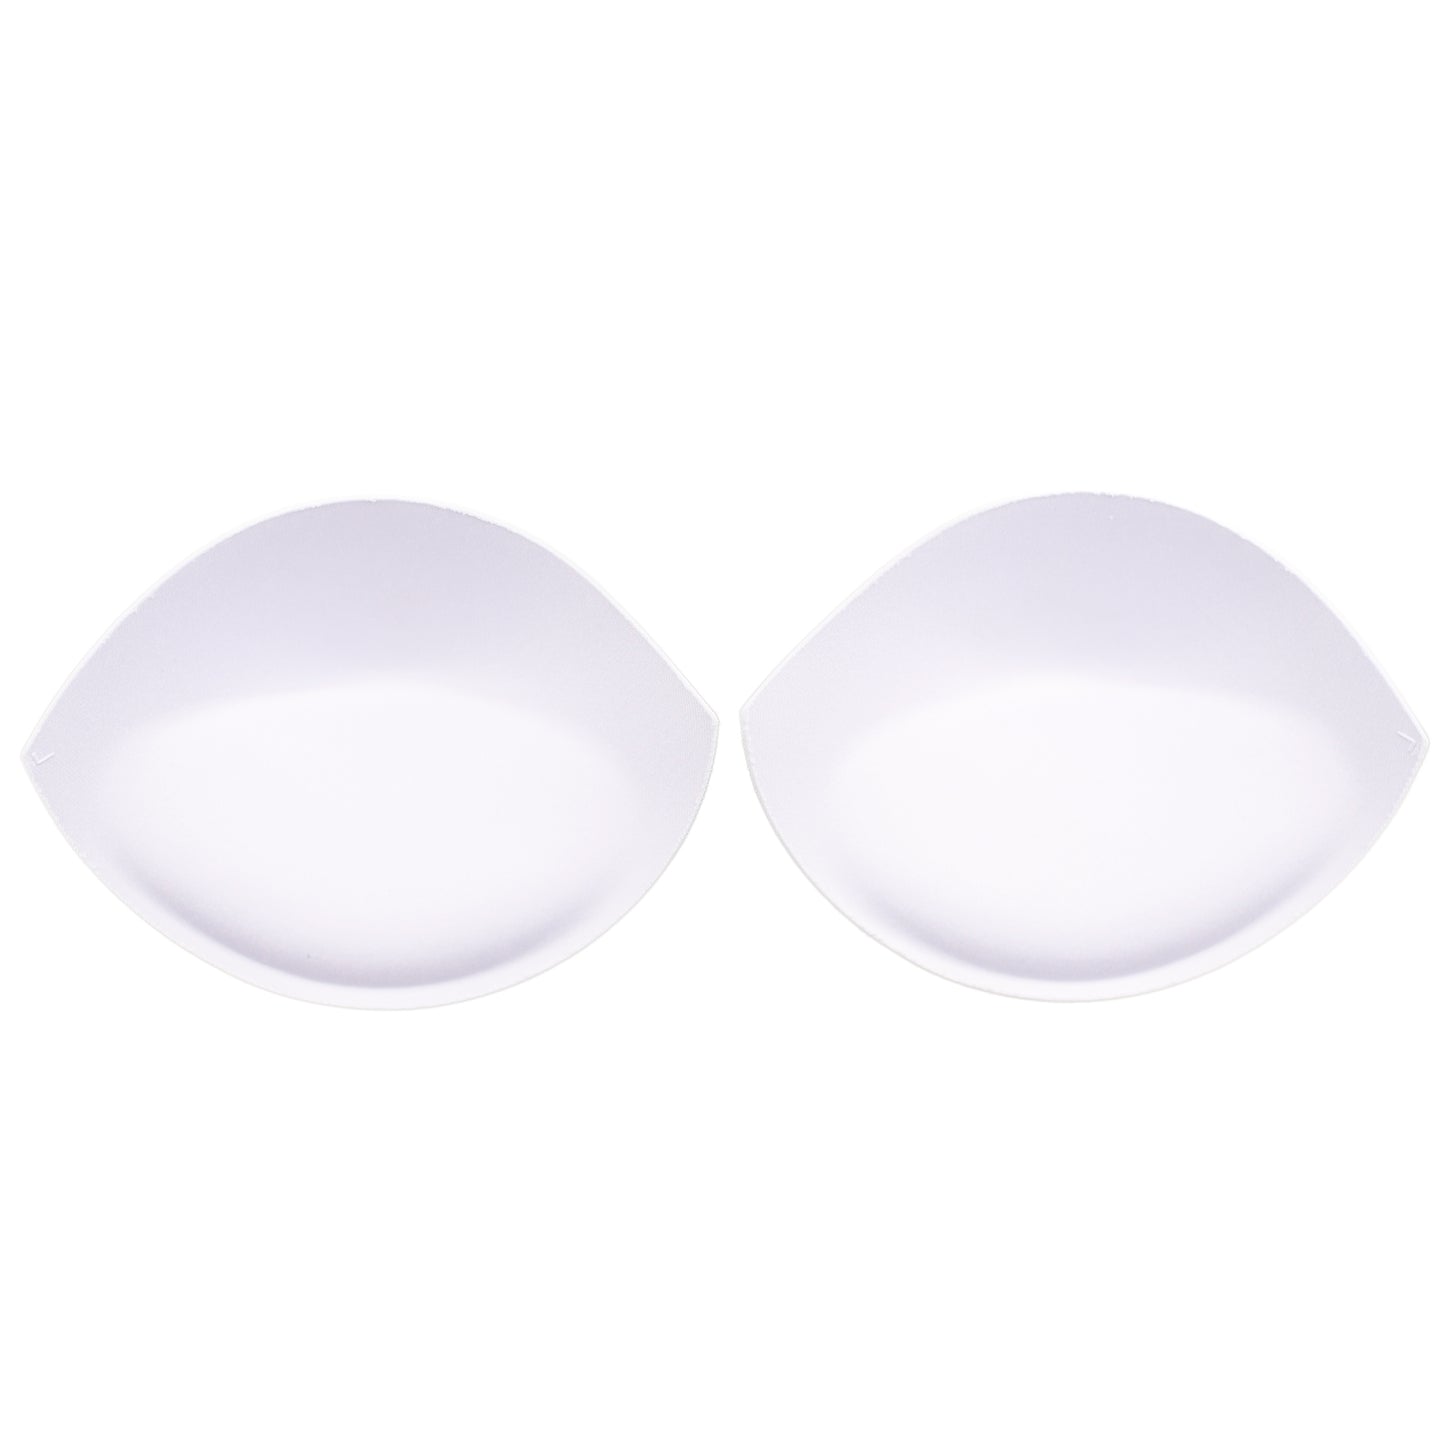 FIRM SOFT-TOUCH PUSH UP BRA CUP WHITE